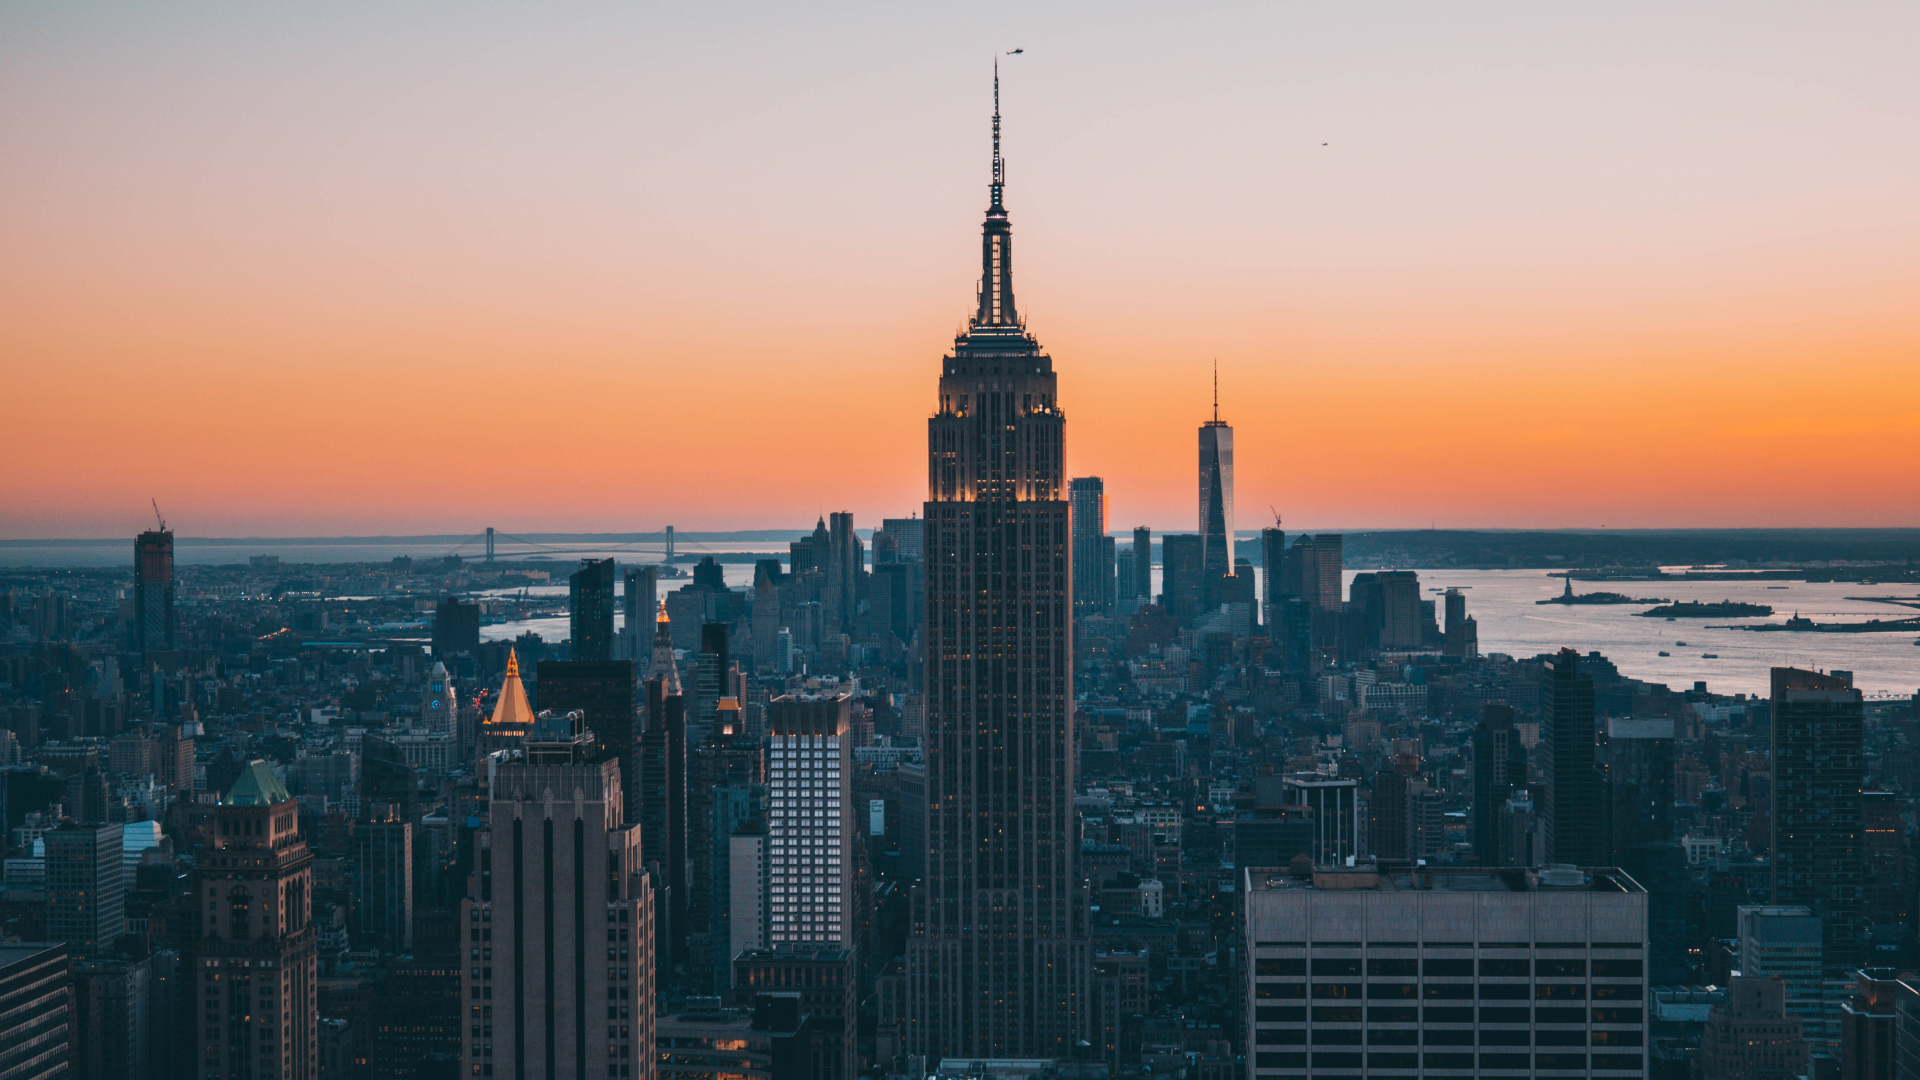 Download 1920x1080 wallpaper empire state building, buildings, sunset